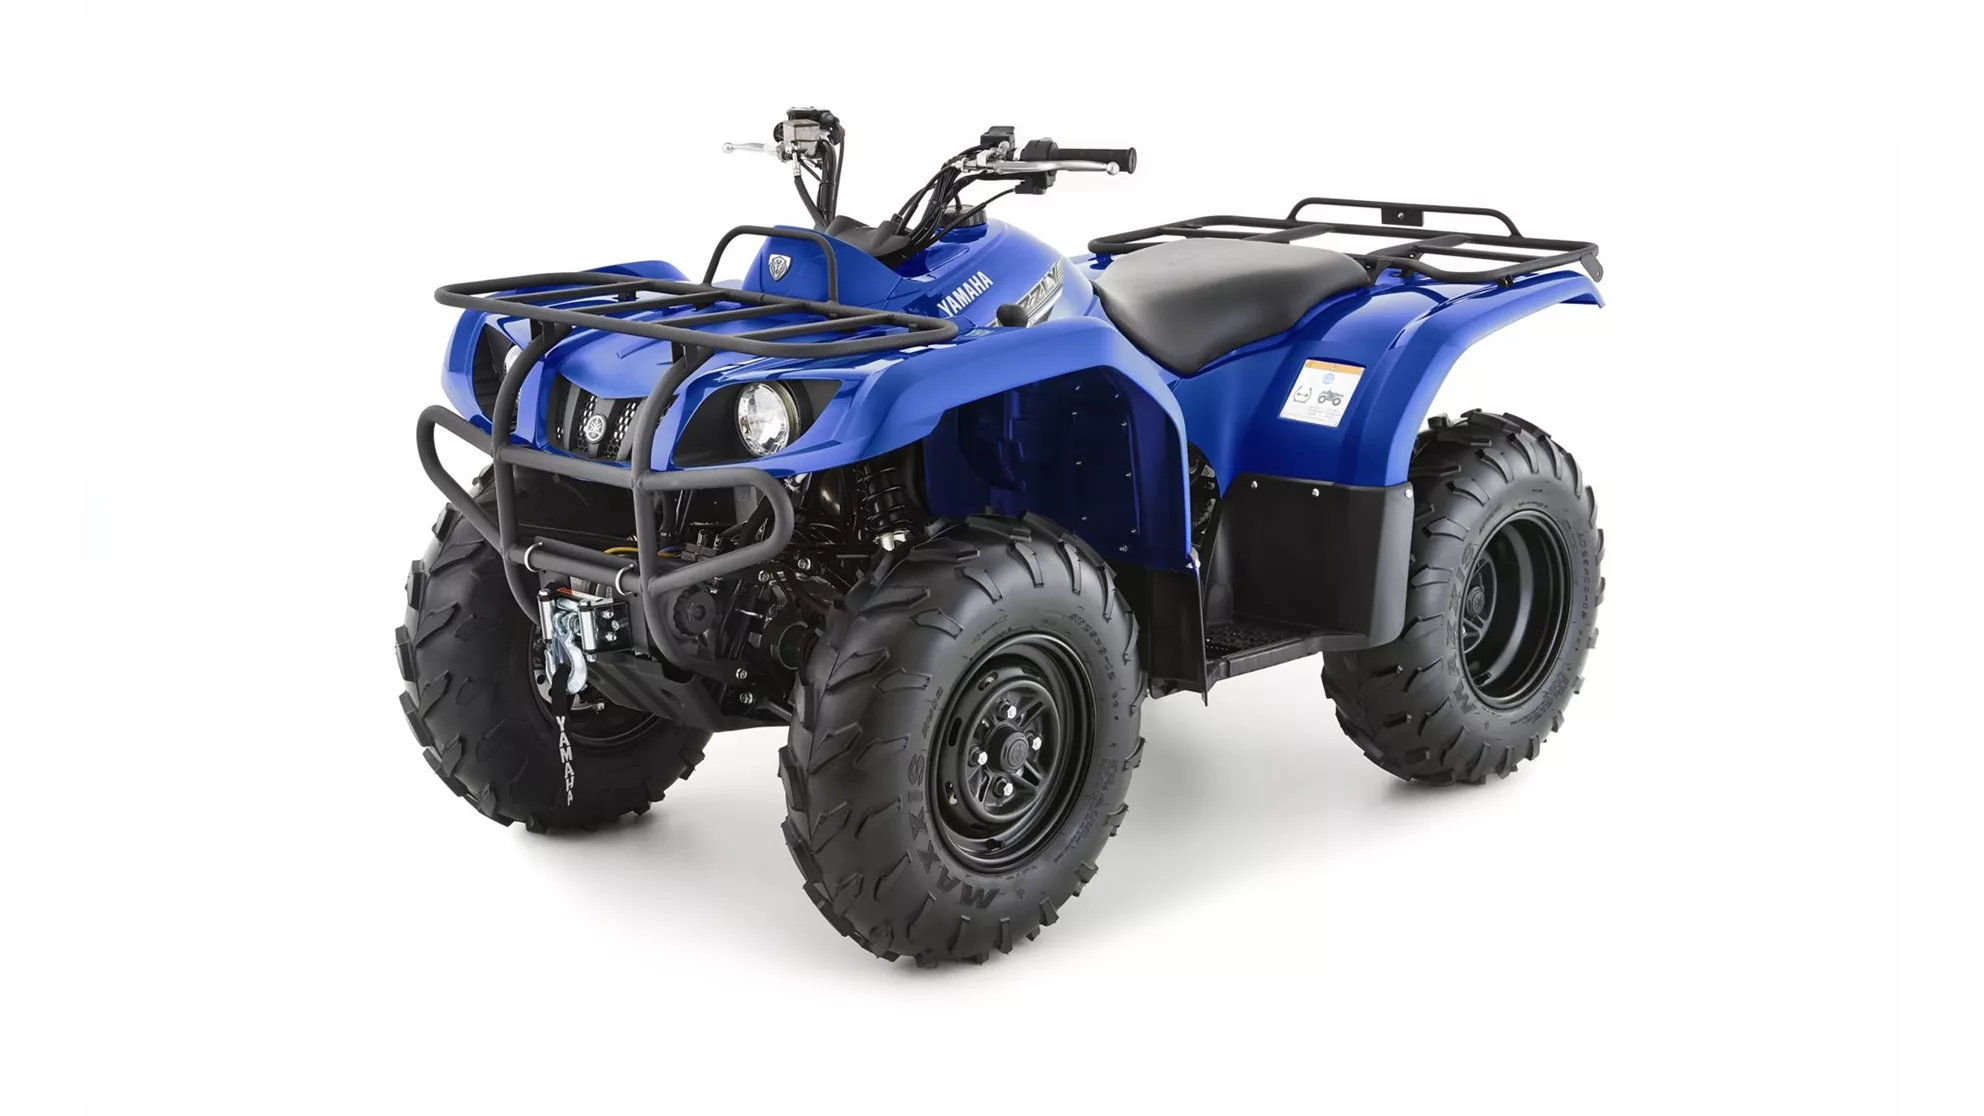 Yamaha Grizzly 350 - Imagen 1